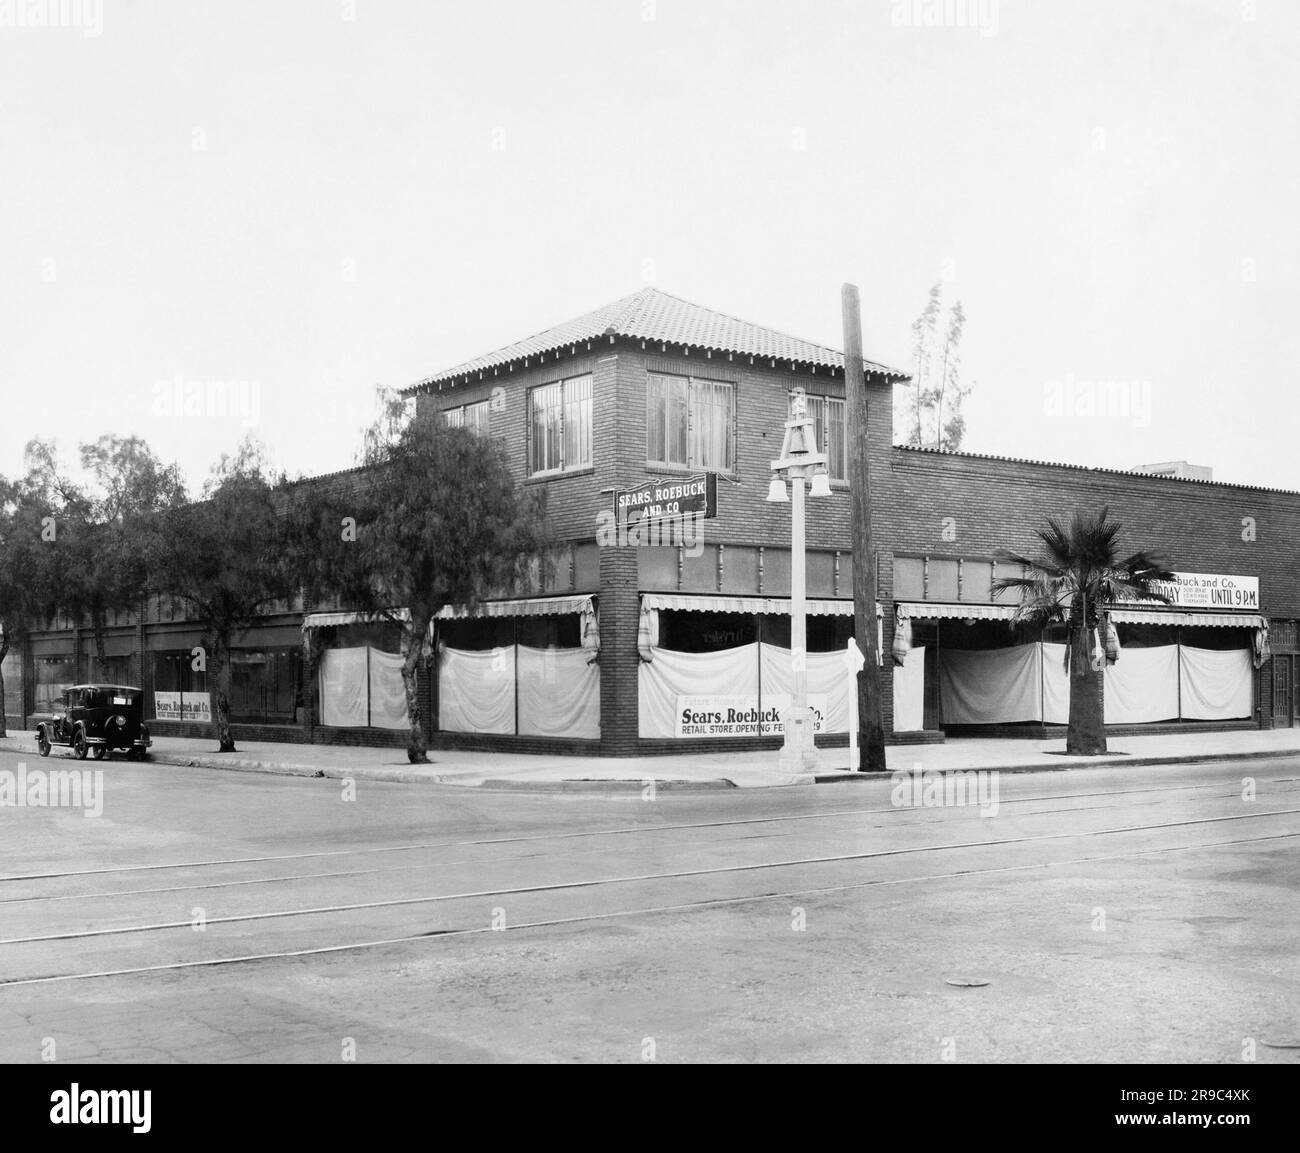 United States:  c. 1927 A corner location in a town where a Sears, Roebuck & Co. store will be opening soon. Stock Photo